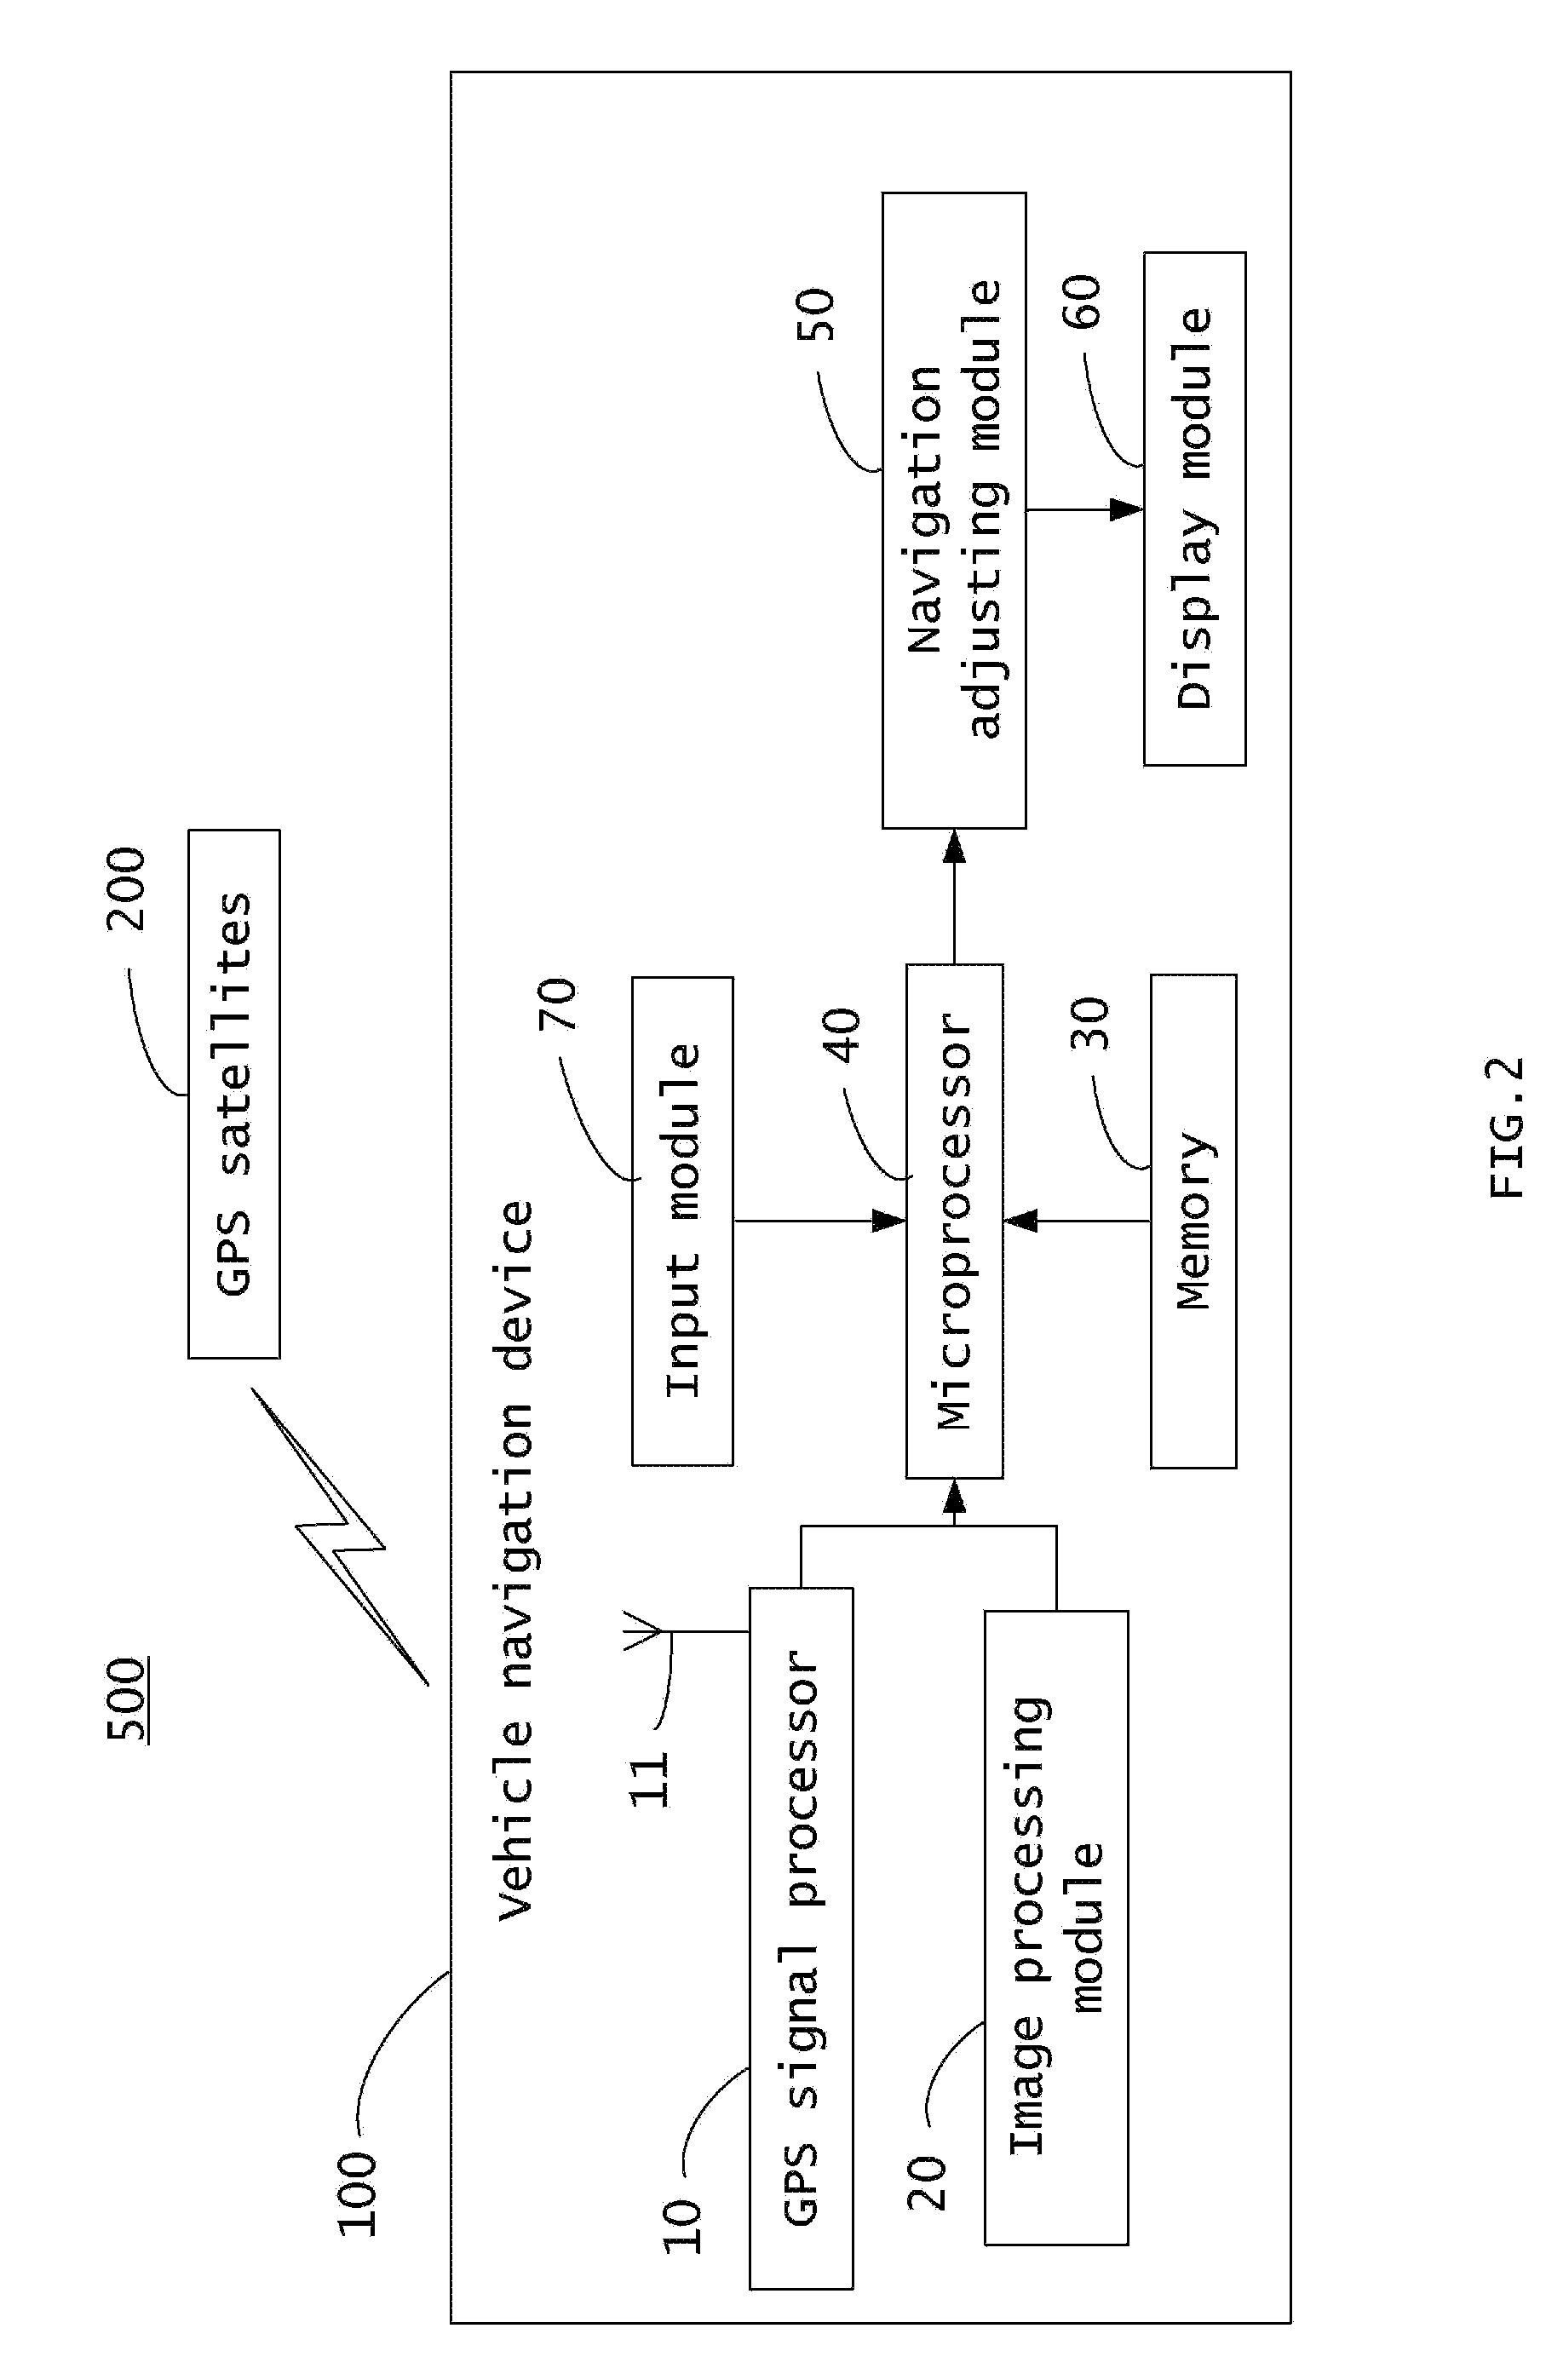 Vehicle navigation systems and methods